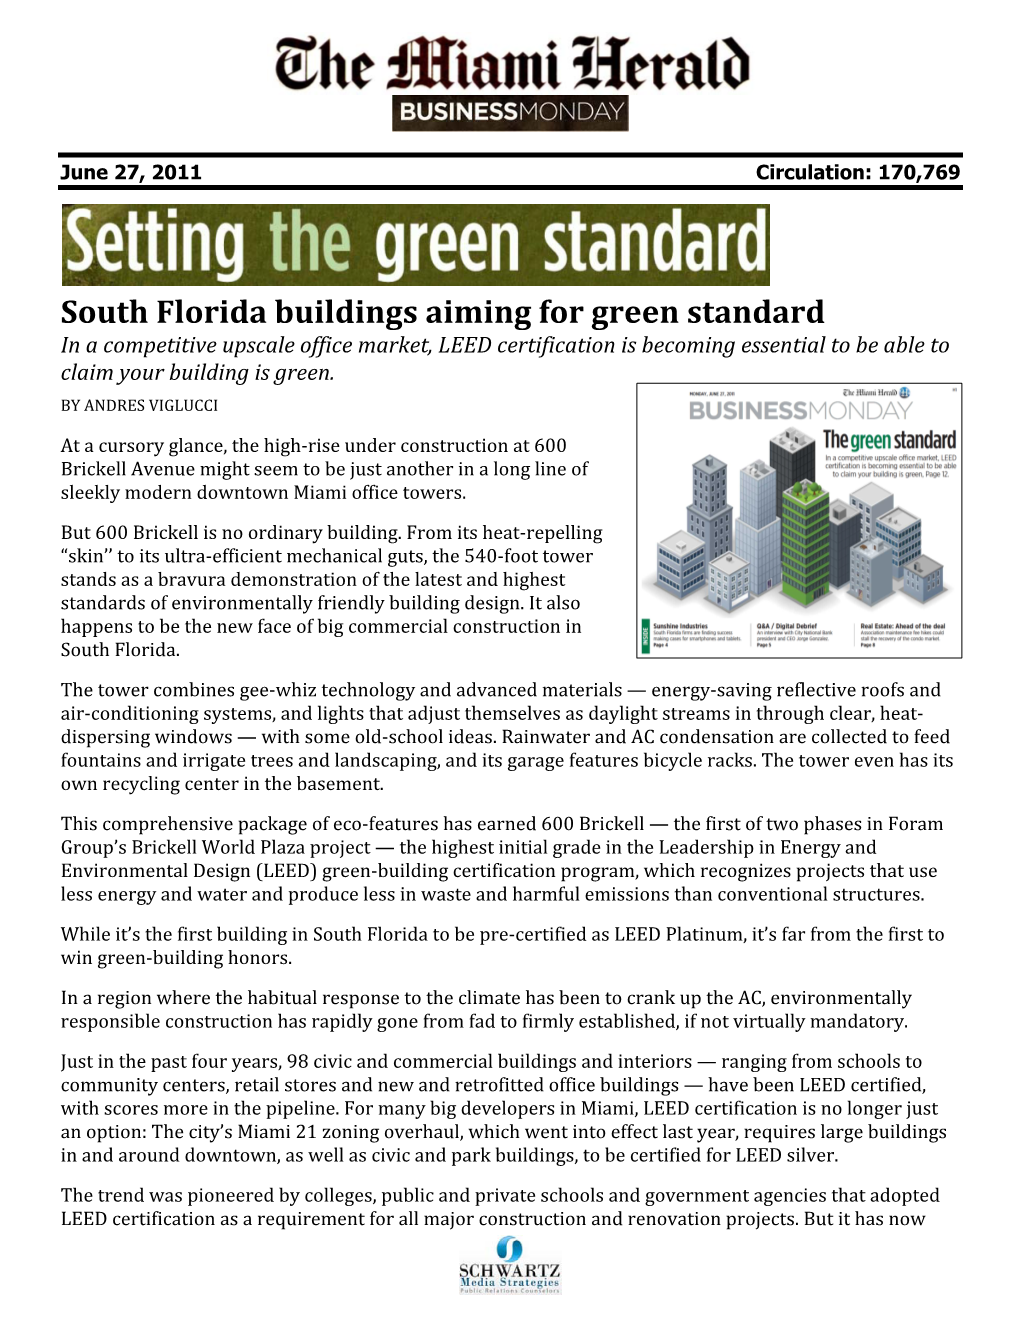 South Florida Buildings Aiming for Green Standard